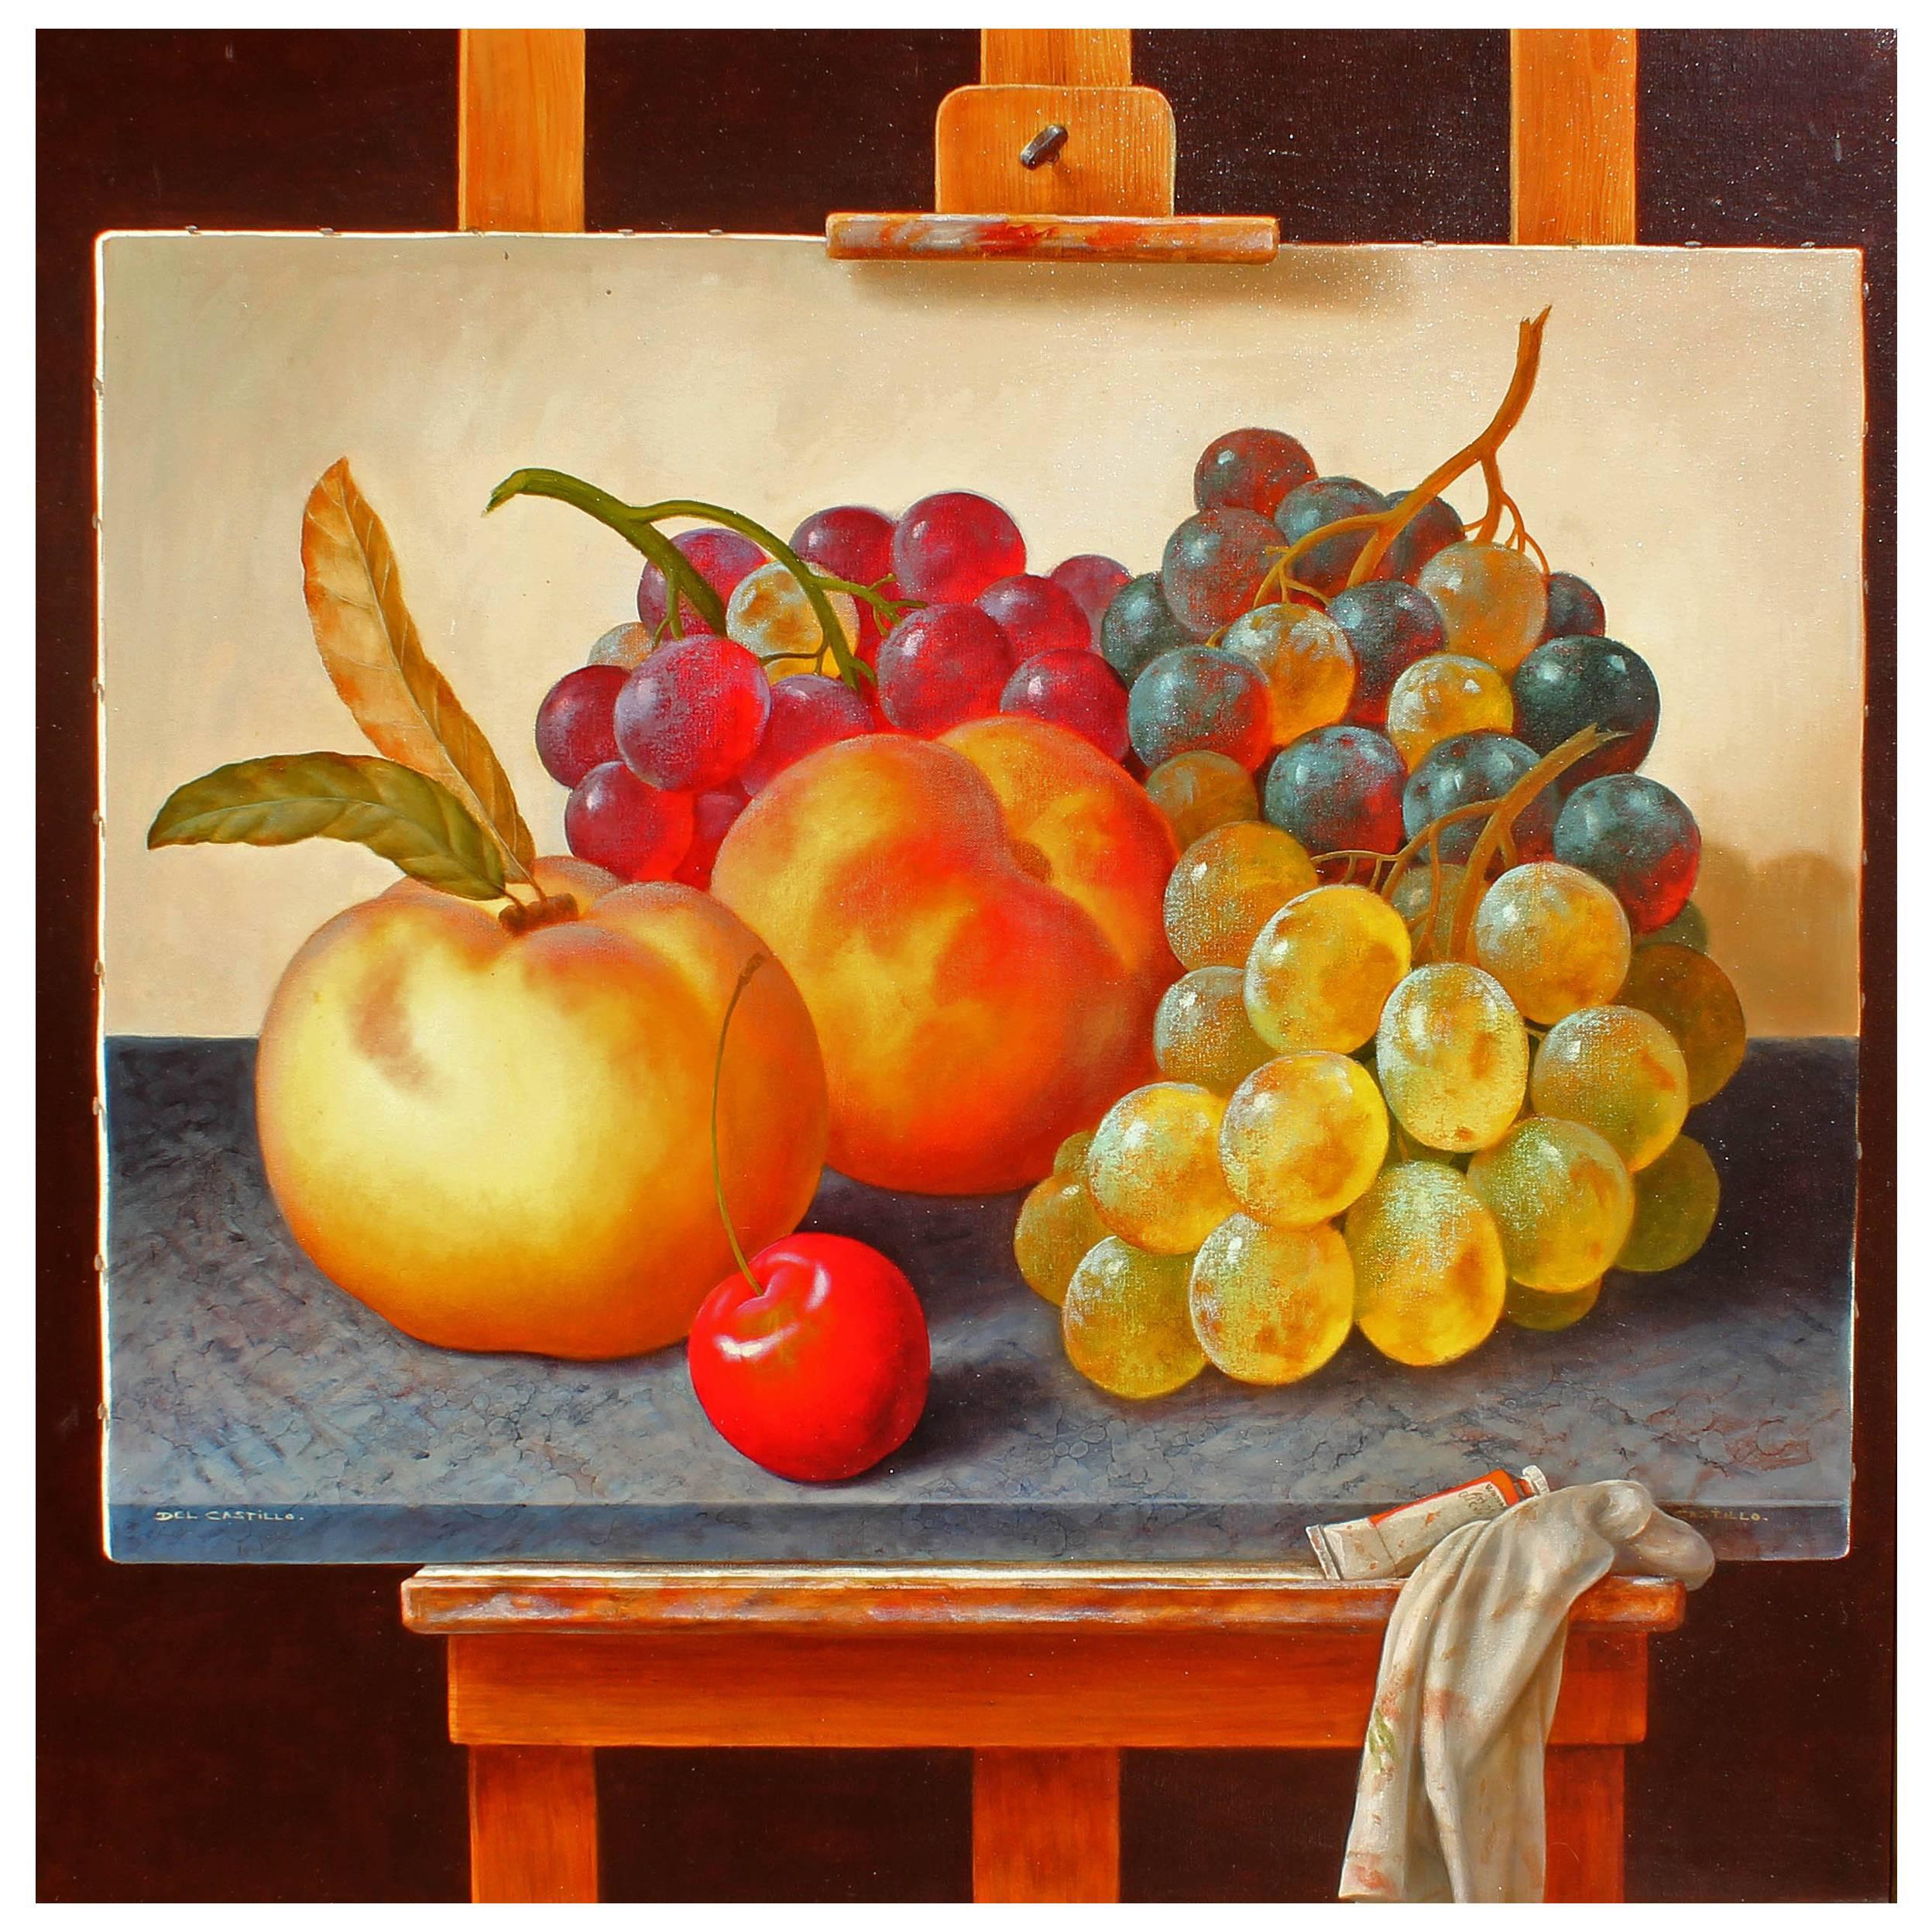 Surreal hyperrealistic trompe l'oeil oil painting by Latin American artist Victor Del Castillo. Peaches, grapes and cherries in rich brilliant colors and incredible detail. Large 41